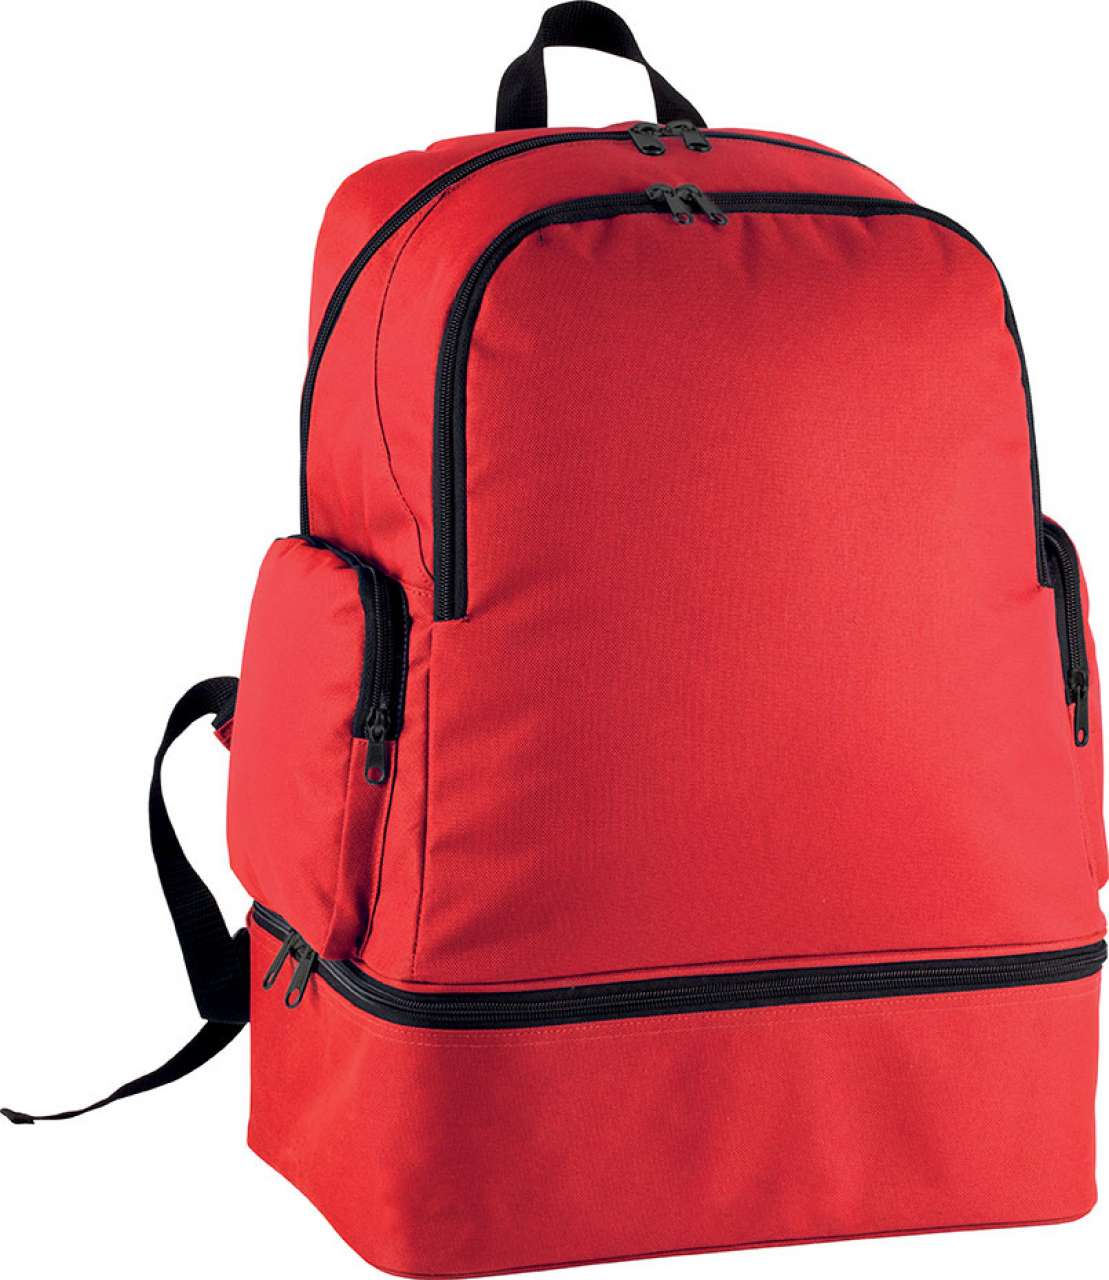 Promo  TEAM SPORTS BACKPACK WITH RIGID BOTTOM